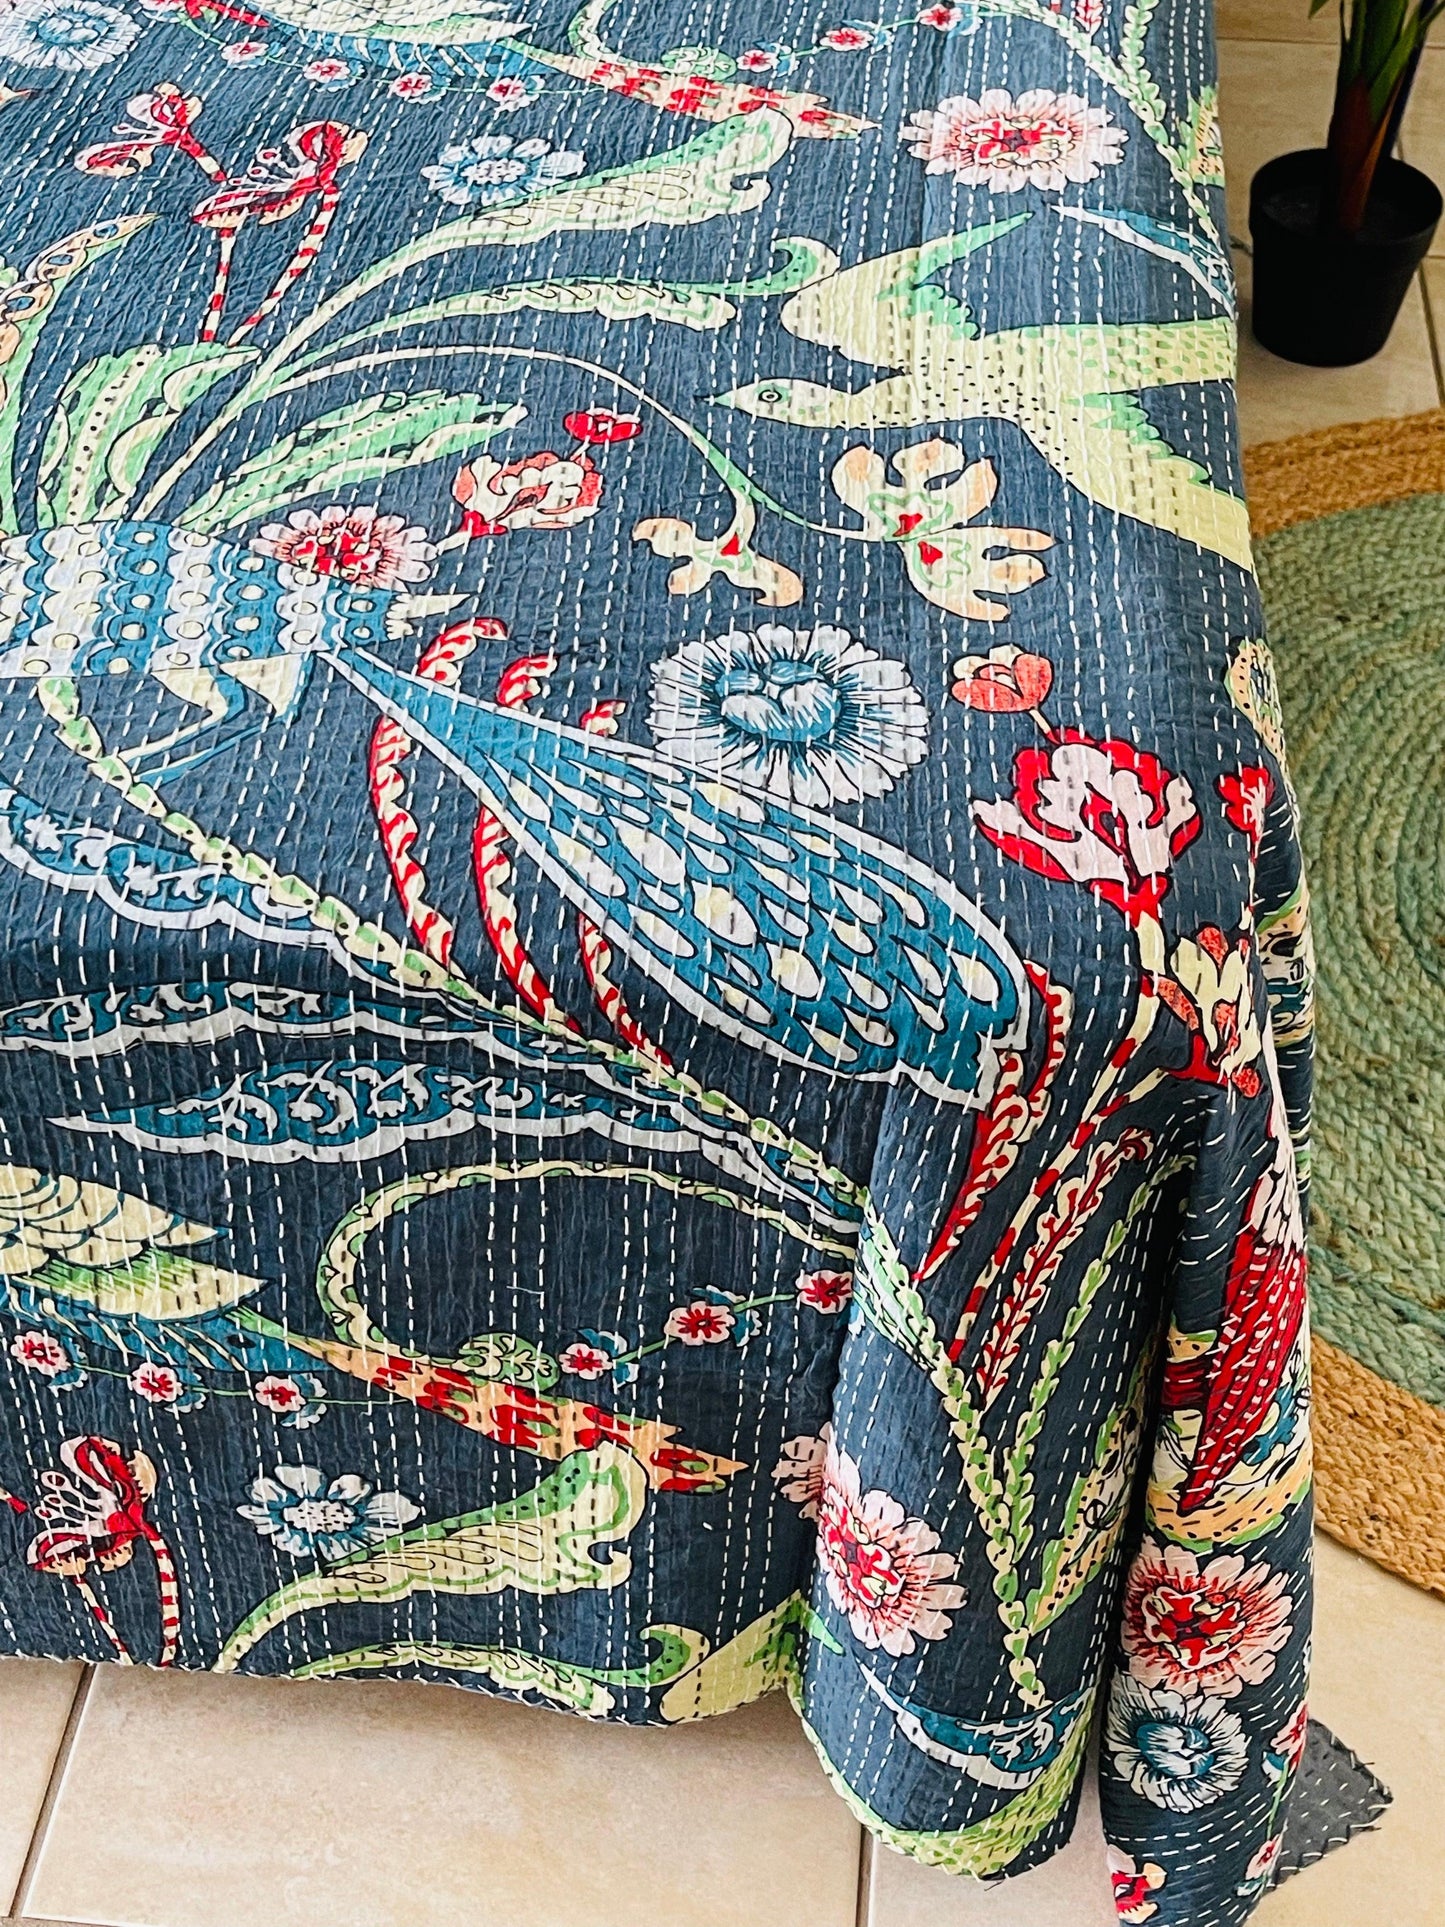 Blue Peacock Kantha/ Bedspread/ Coverlet - Rooii by Tuvisha